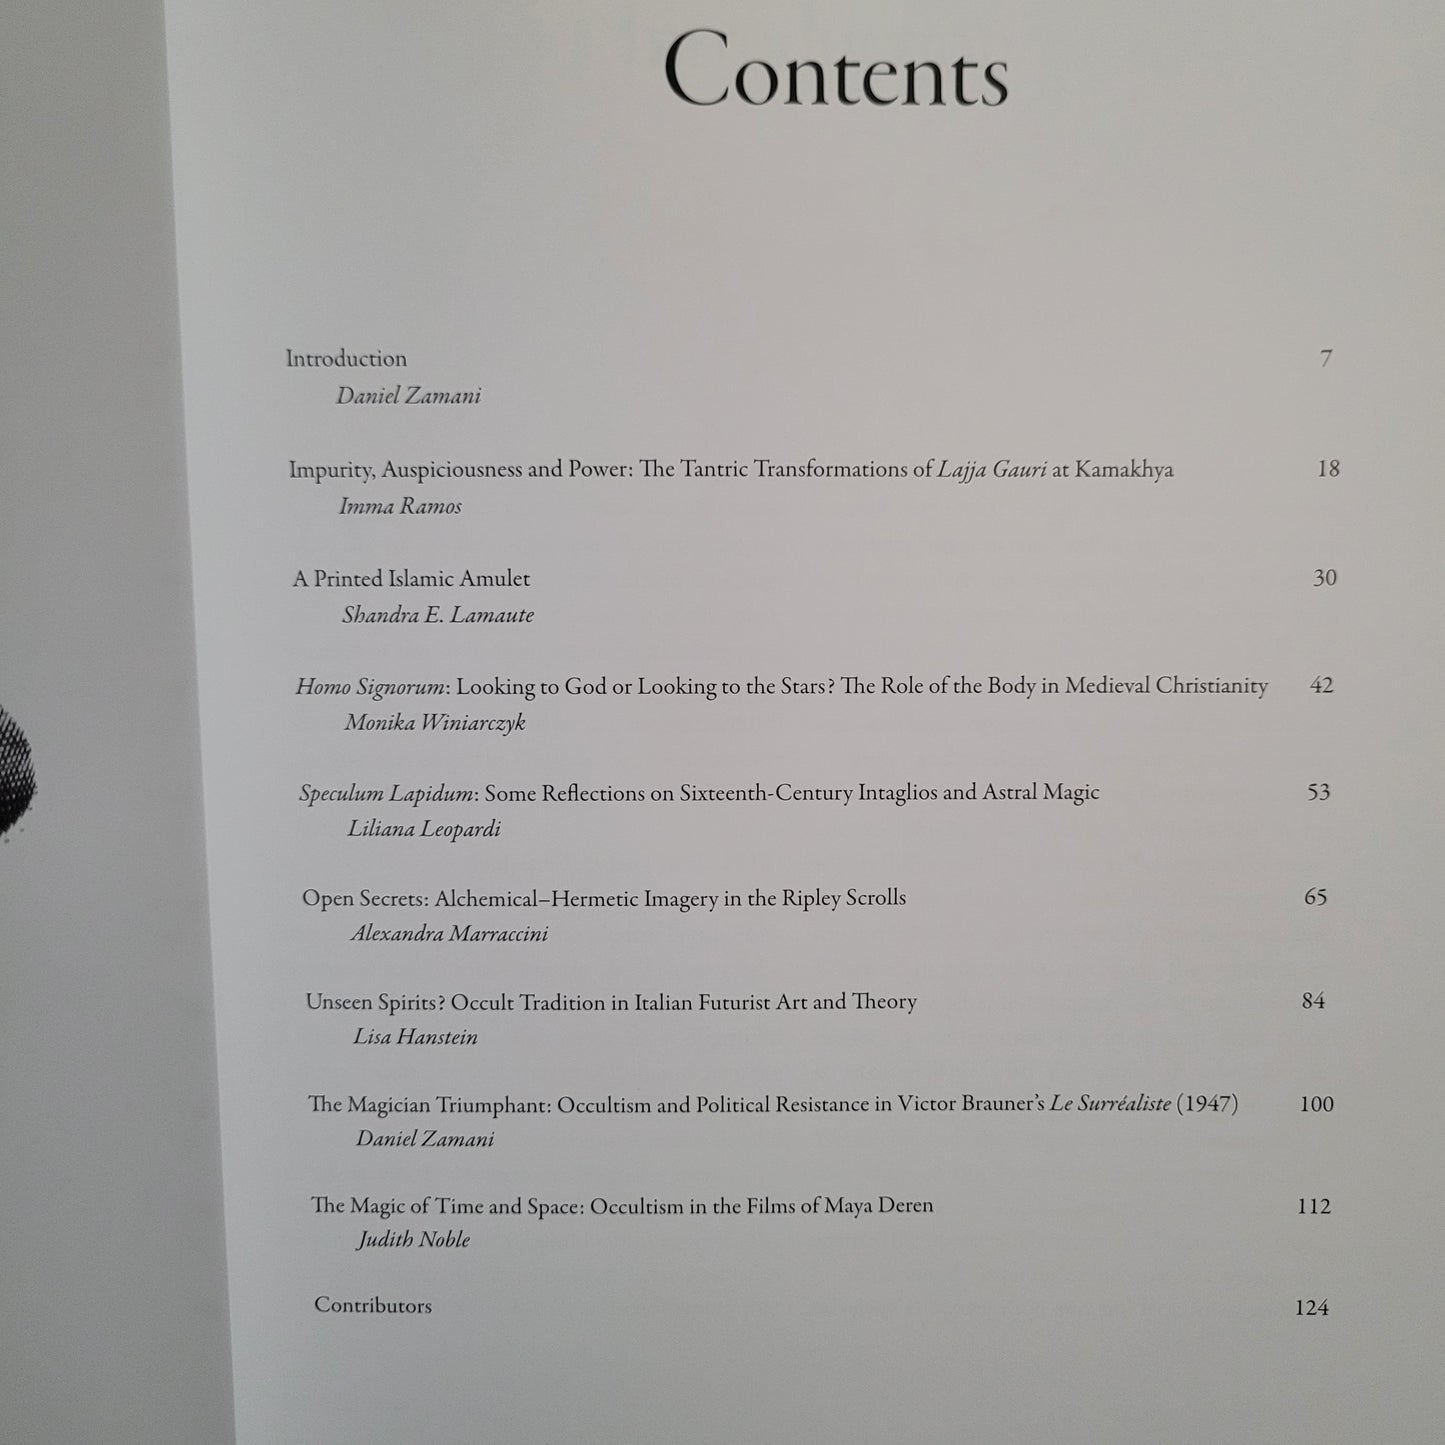 Abraxas International Journal of Esoteric Studies Special Issue No. 1: Charming Intentions: Occultism, Magic and the History of Art, Summer 2013 Edited by Daniel Zamani (Fulgur Esoterica, 2013) Hardcover Special Edition